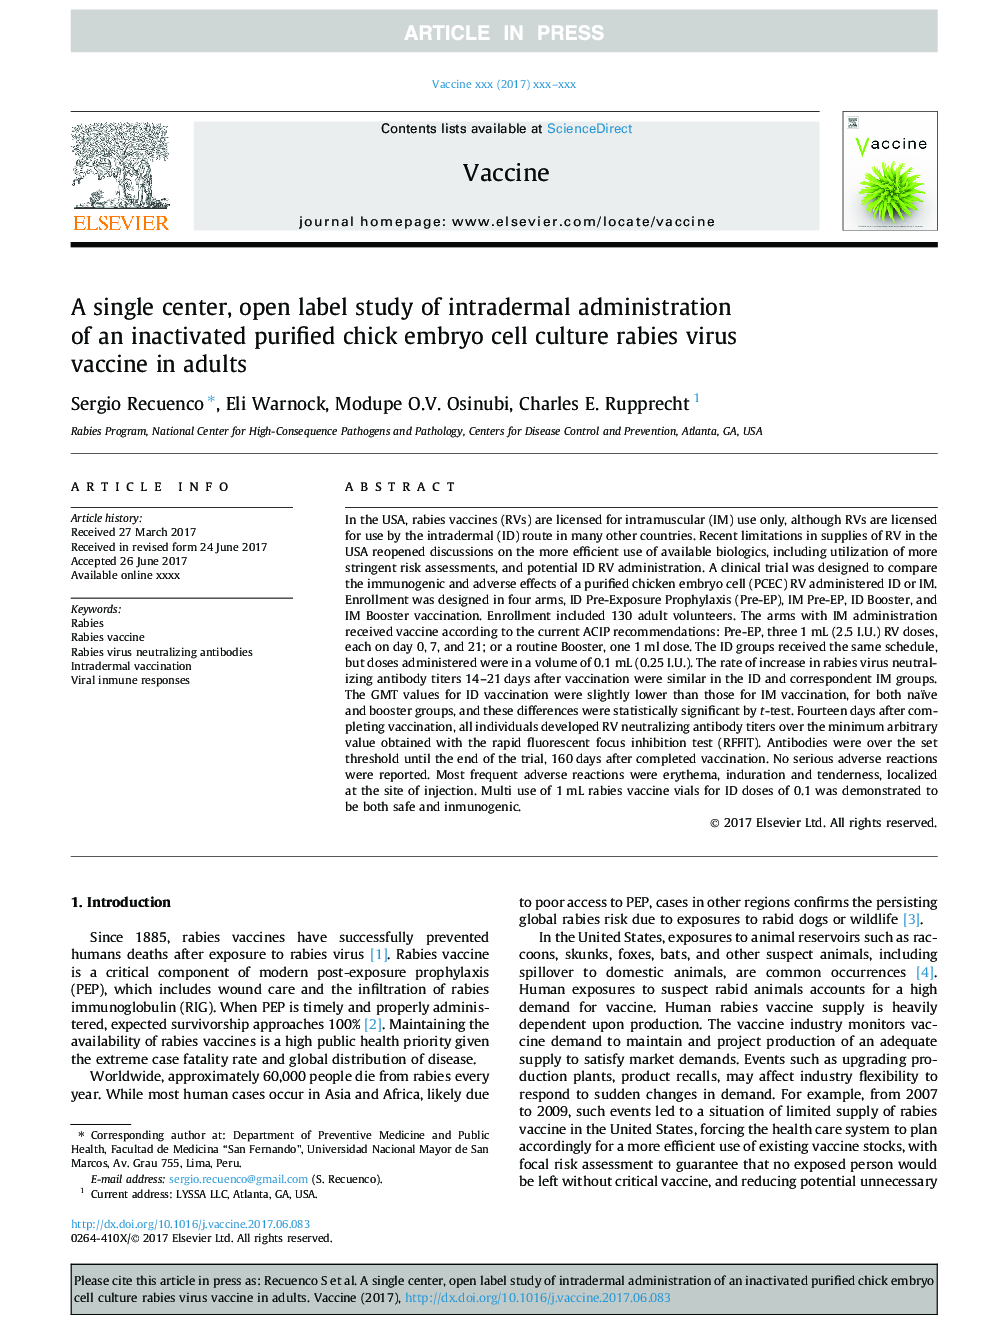 A single center, open label study of intradermal administration of an inactivated purified chick embryo cell culture rabies virus vaccine in adults